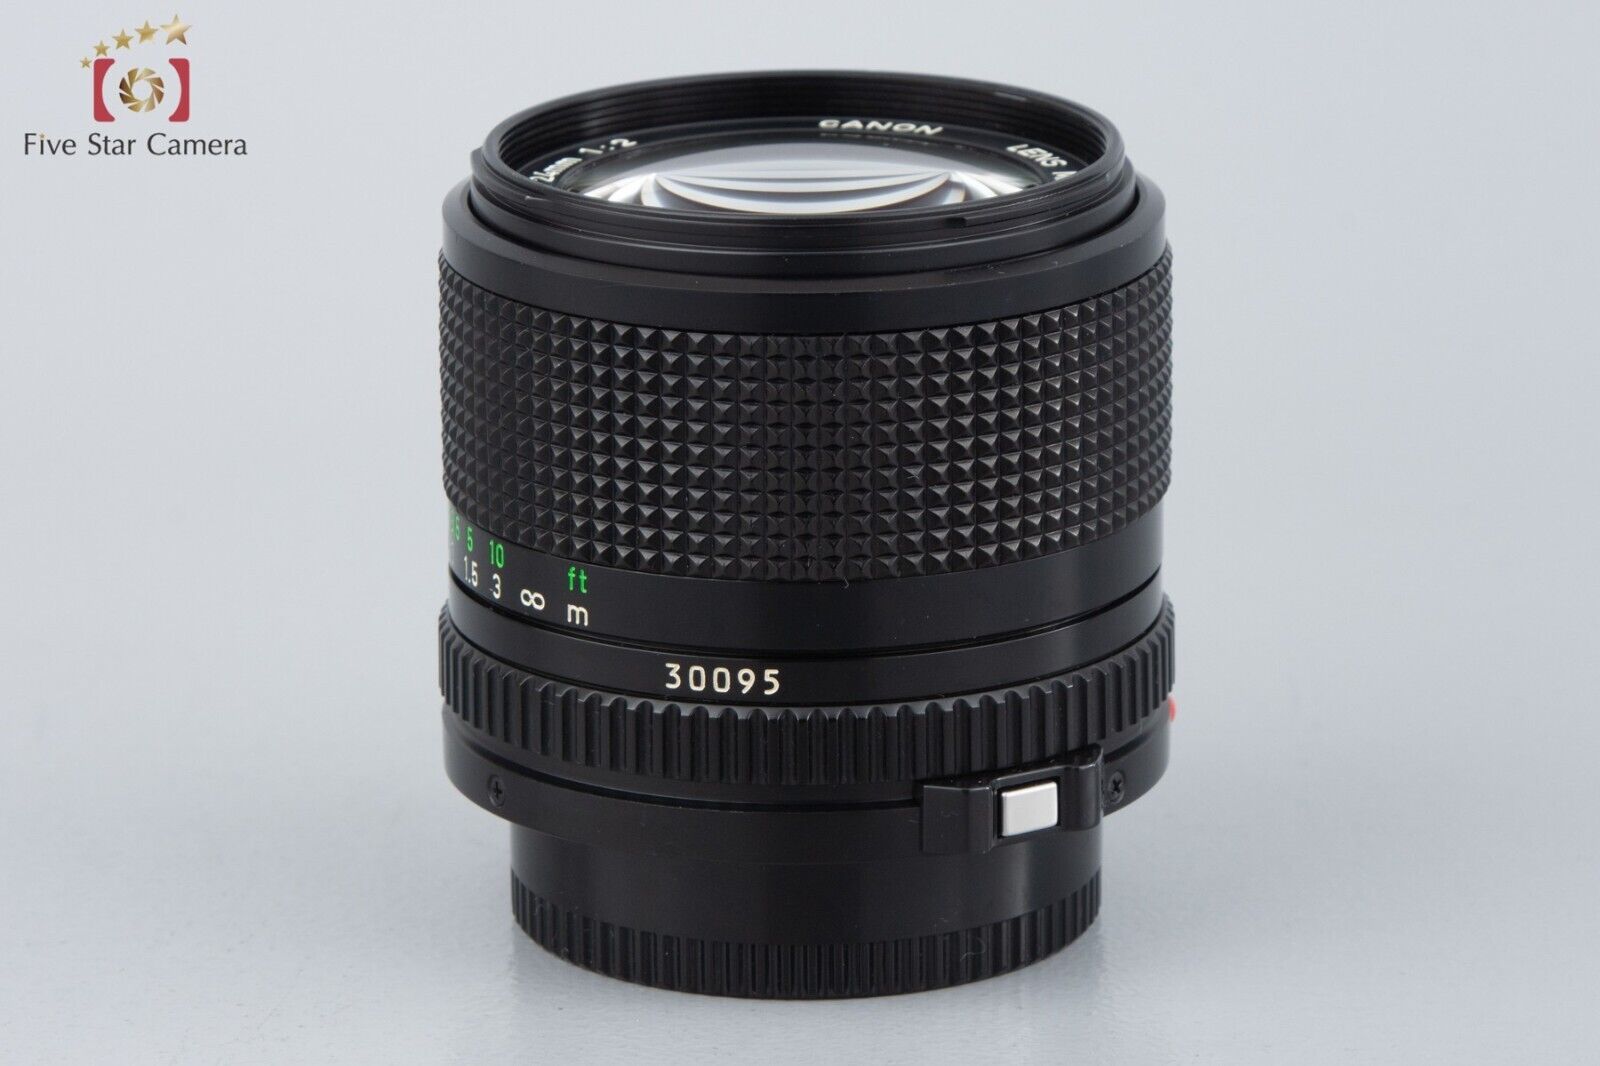 Excellent!! Canon New FD 24mm f/2